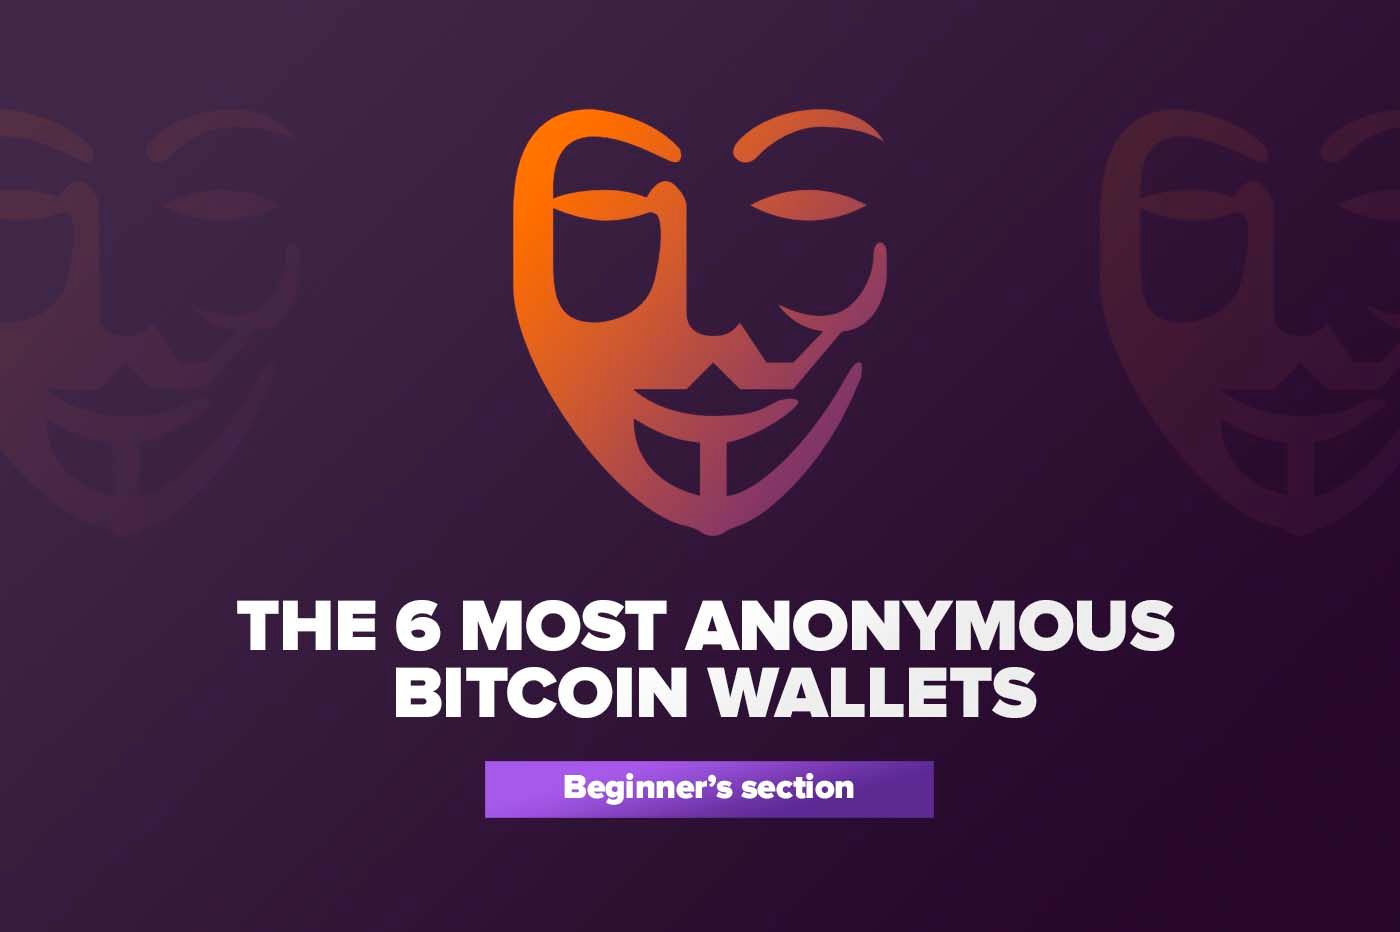 Article The 6 Most Anonymous Bitcoin Wallets